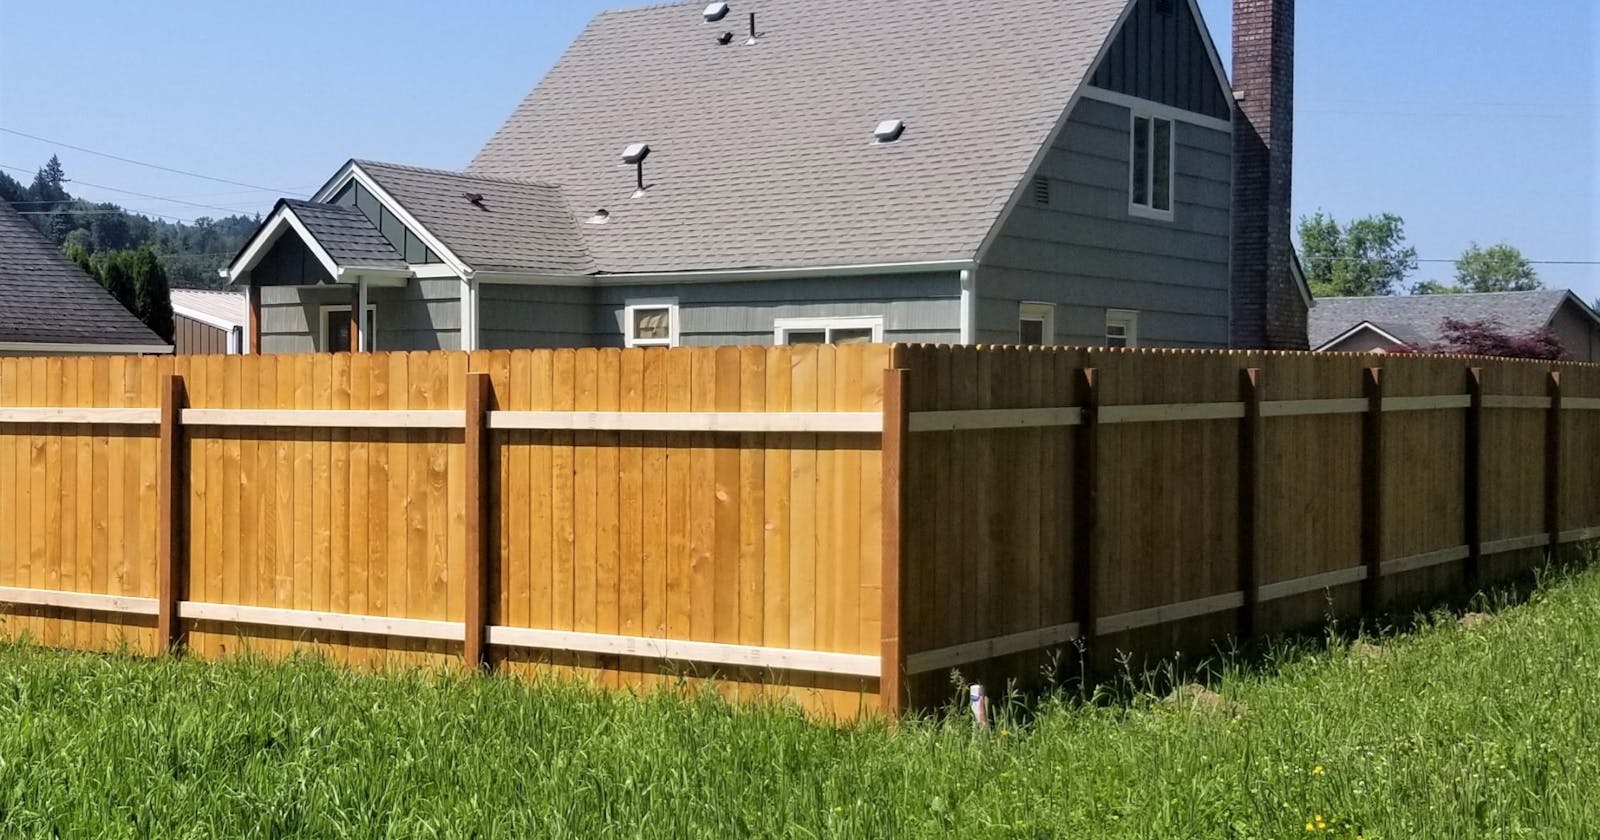 All you need to know about fence installation Vancouver WA